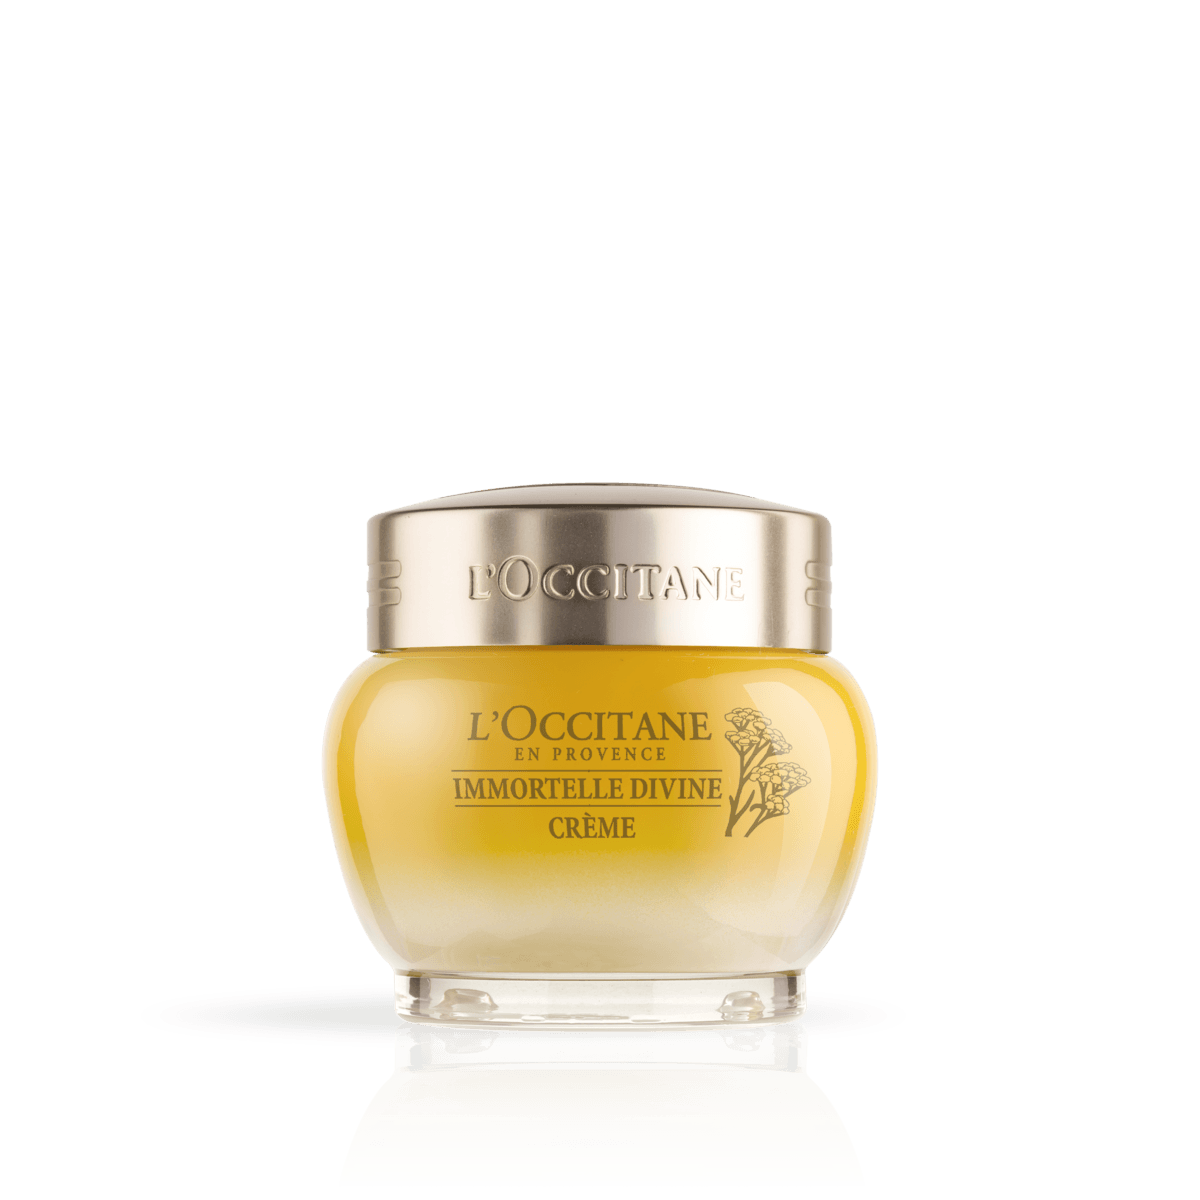 Best Selling Shopify Products on cr.loccitane.com-4